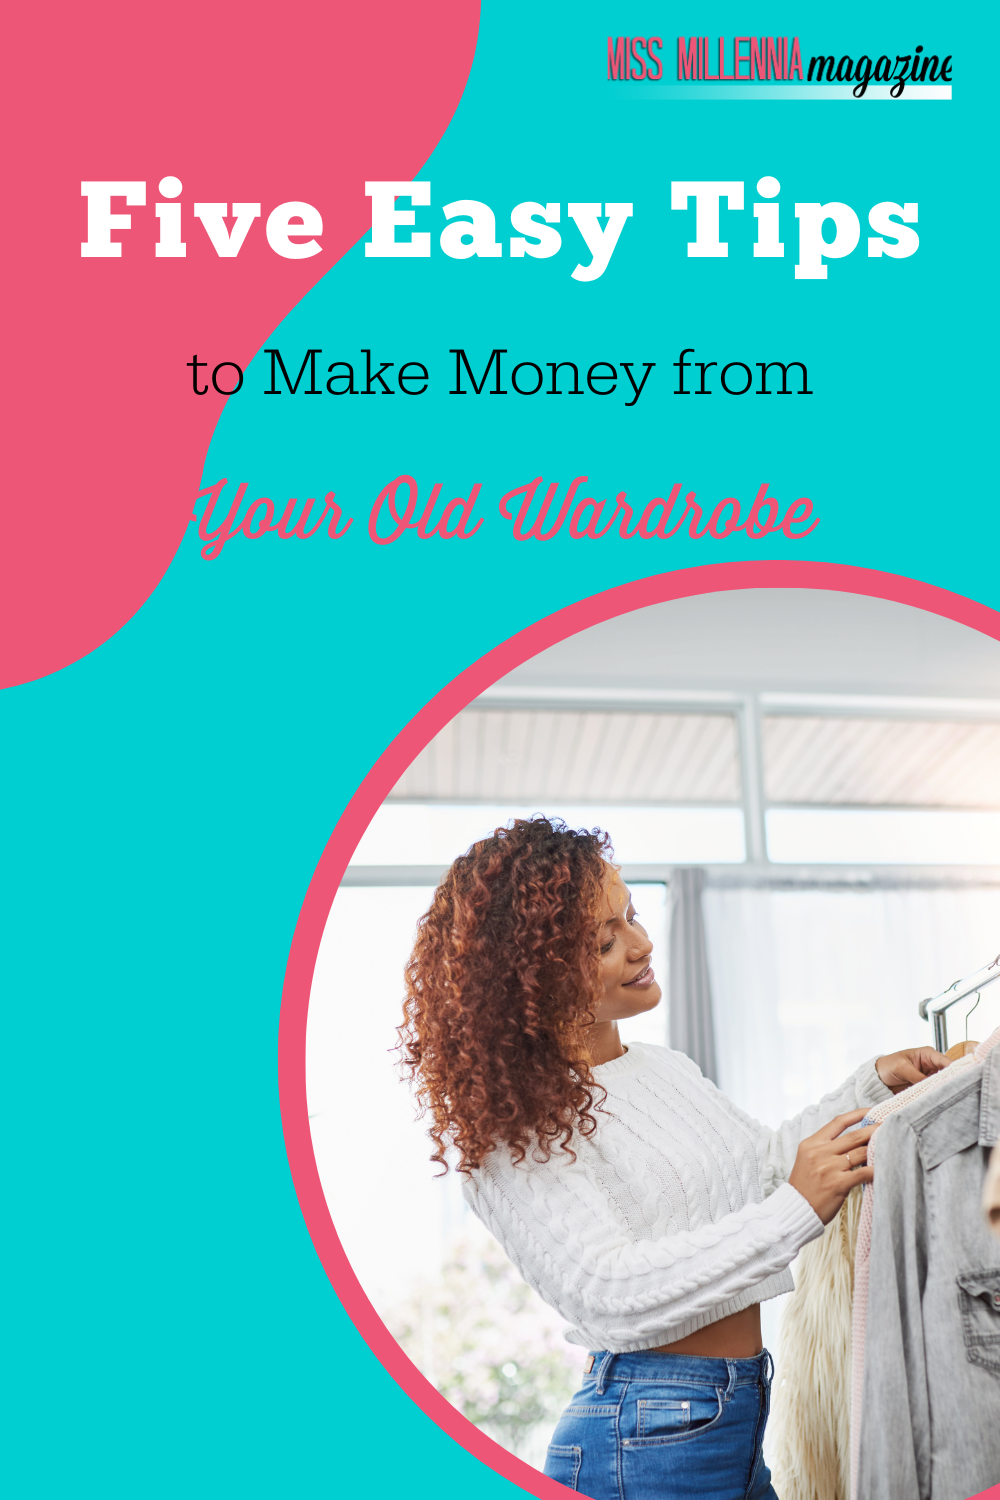 Five Easy Tips to Make Money from Your Old Wardrobe